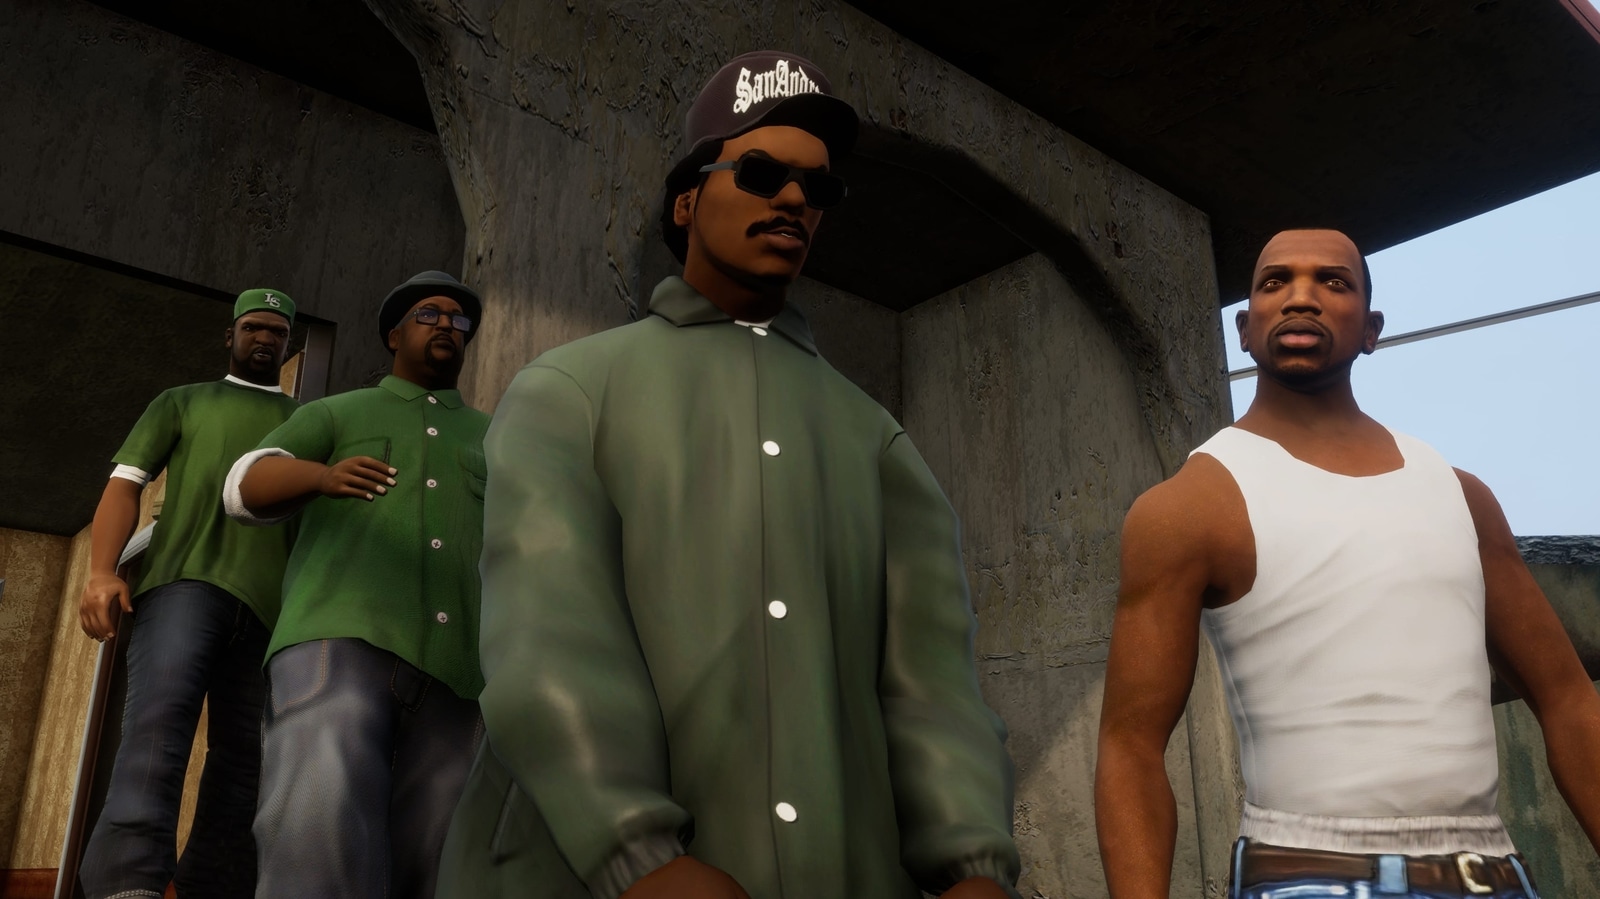 How to claim a free copy of GTA San Andreas from Rockstar Games